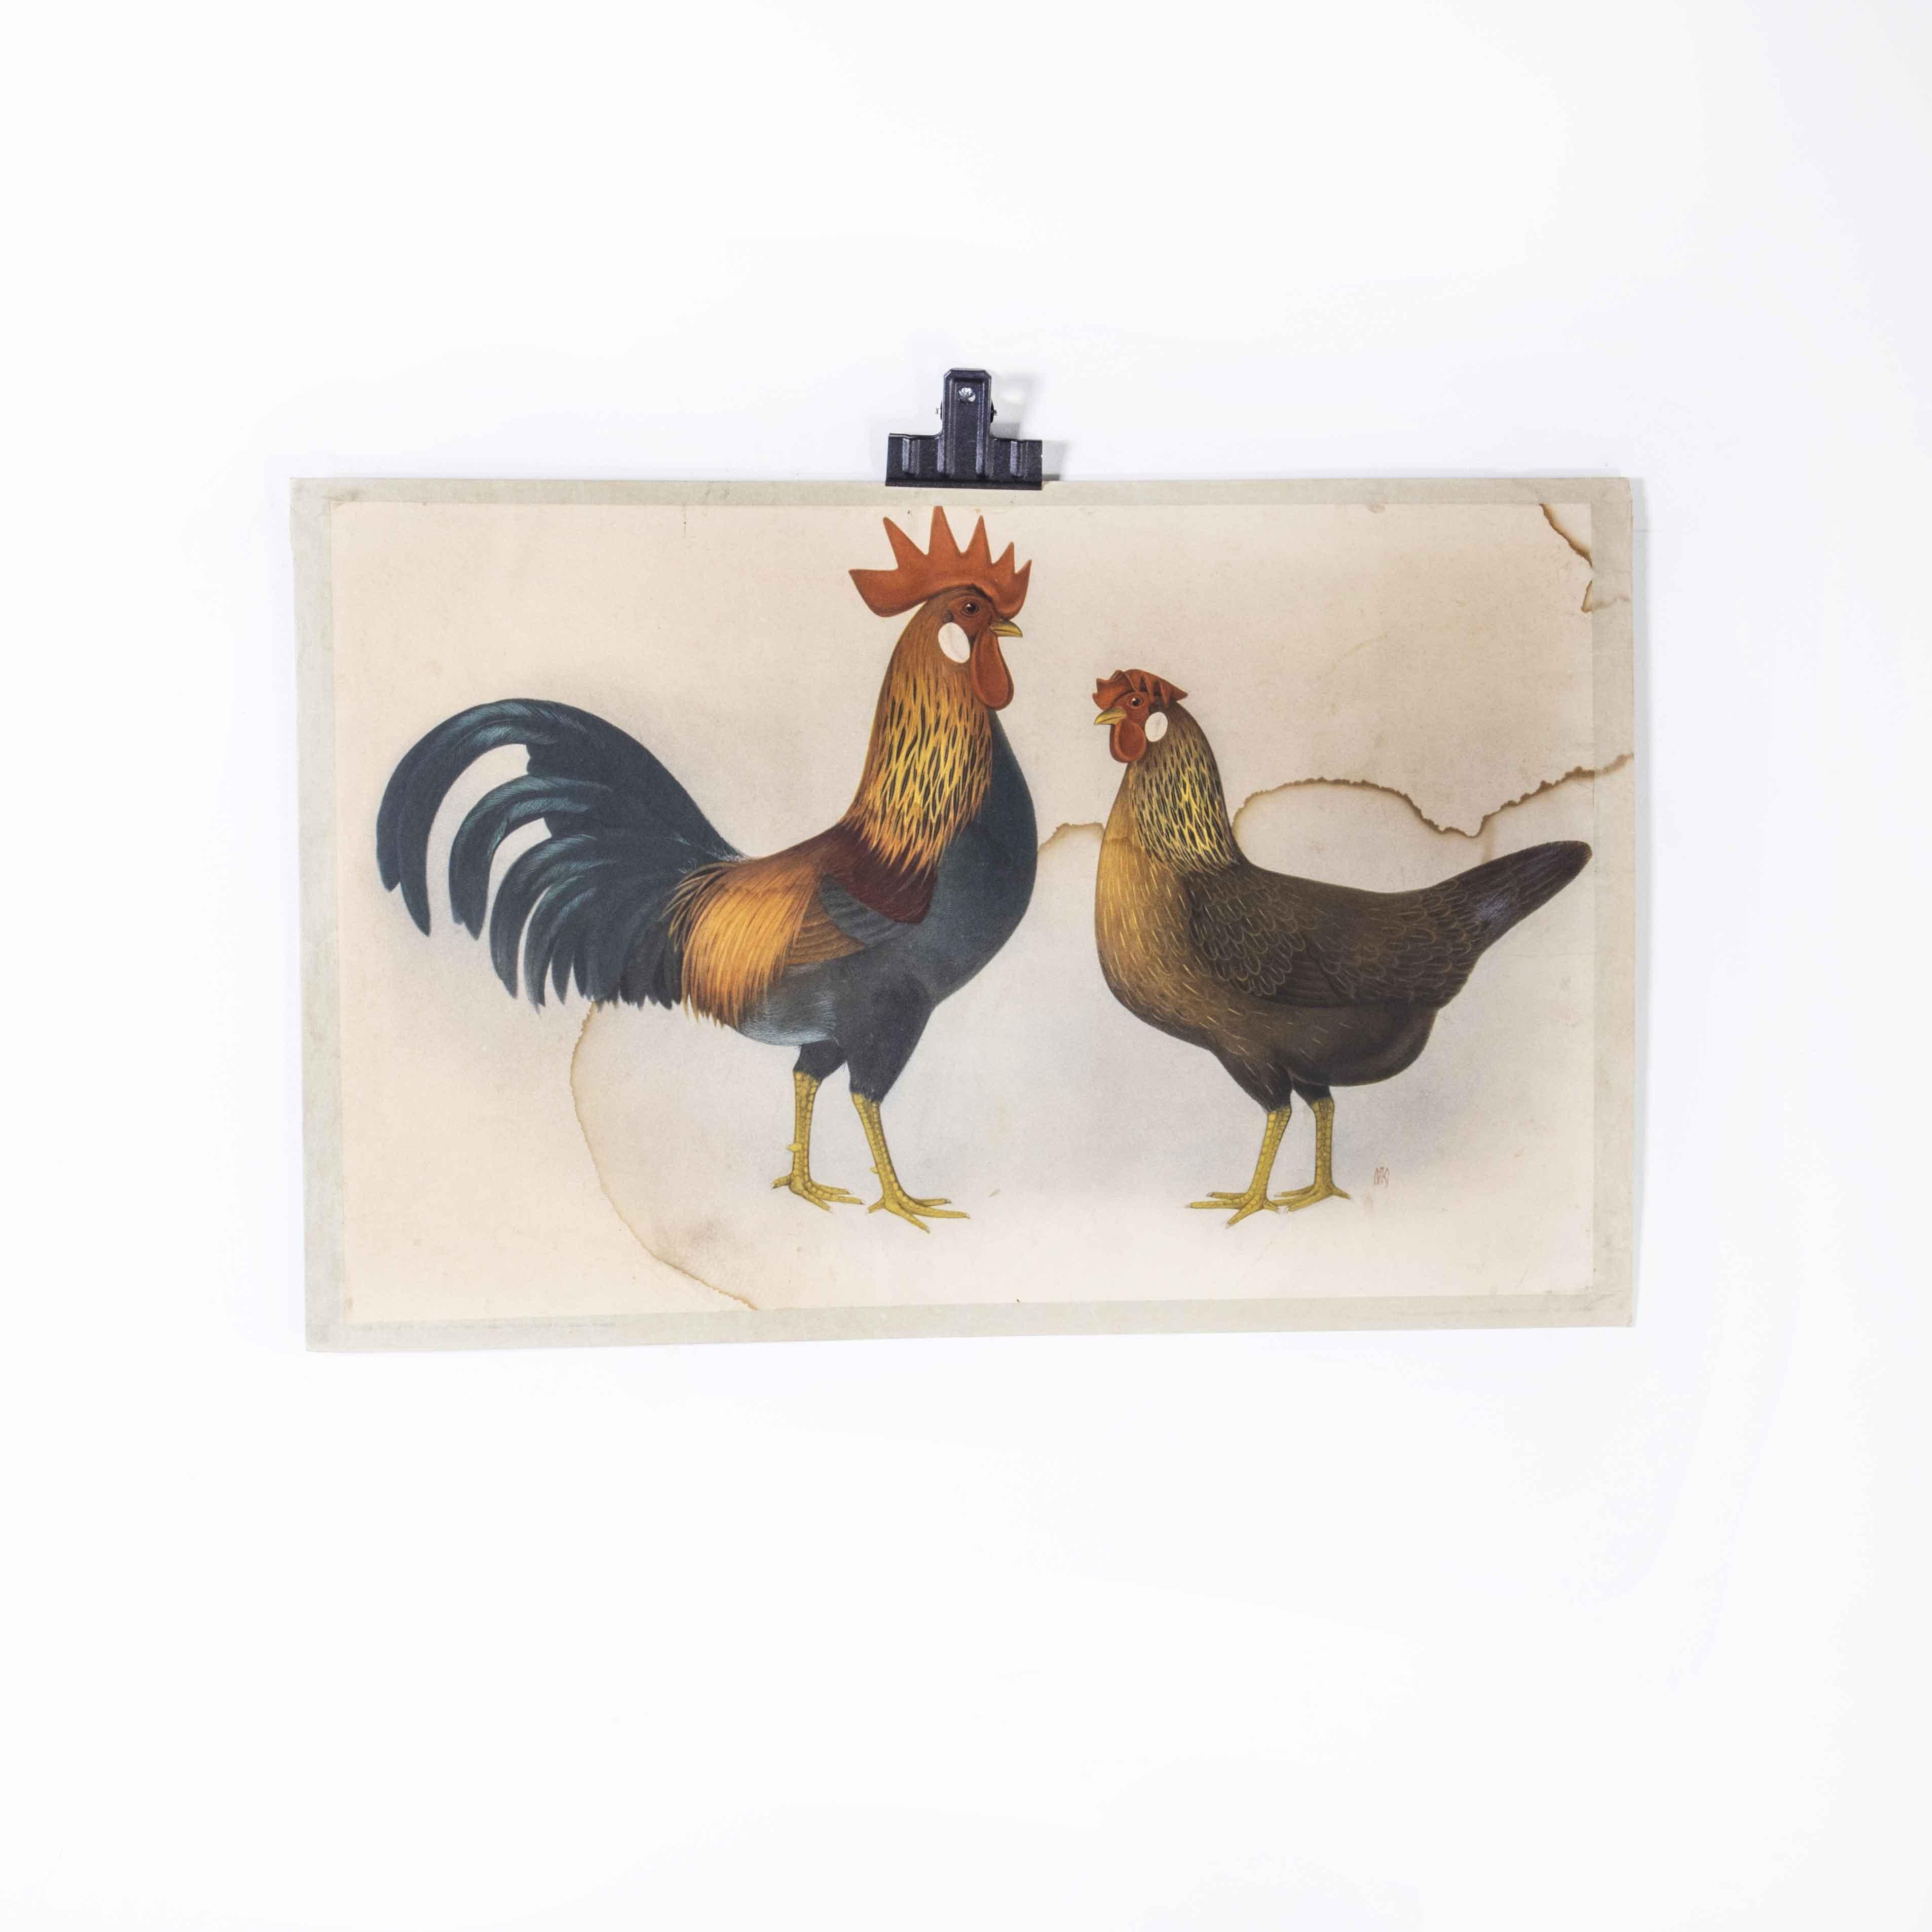 1950’s Hen And Rooster Educational Poster
1950’s Hen And Rooster Educational Poster. Early 20th century Czechoslovakian educational chart. A rare and vintage wall chart from the Czech Republic illustrating a hen and rooster. This heavyweight paper